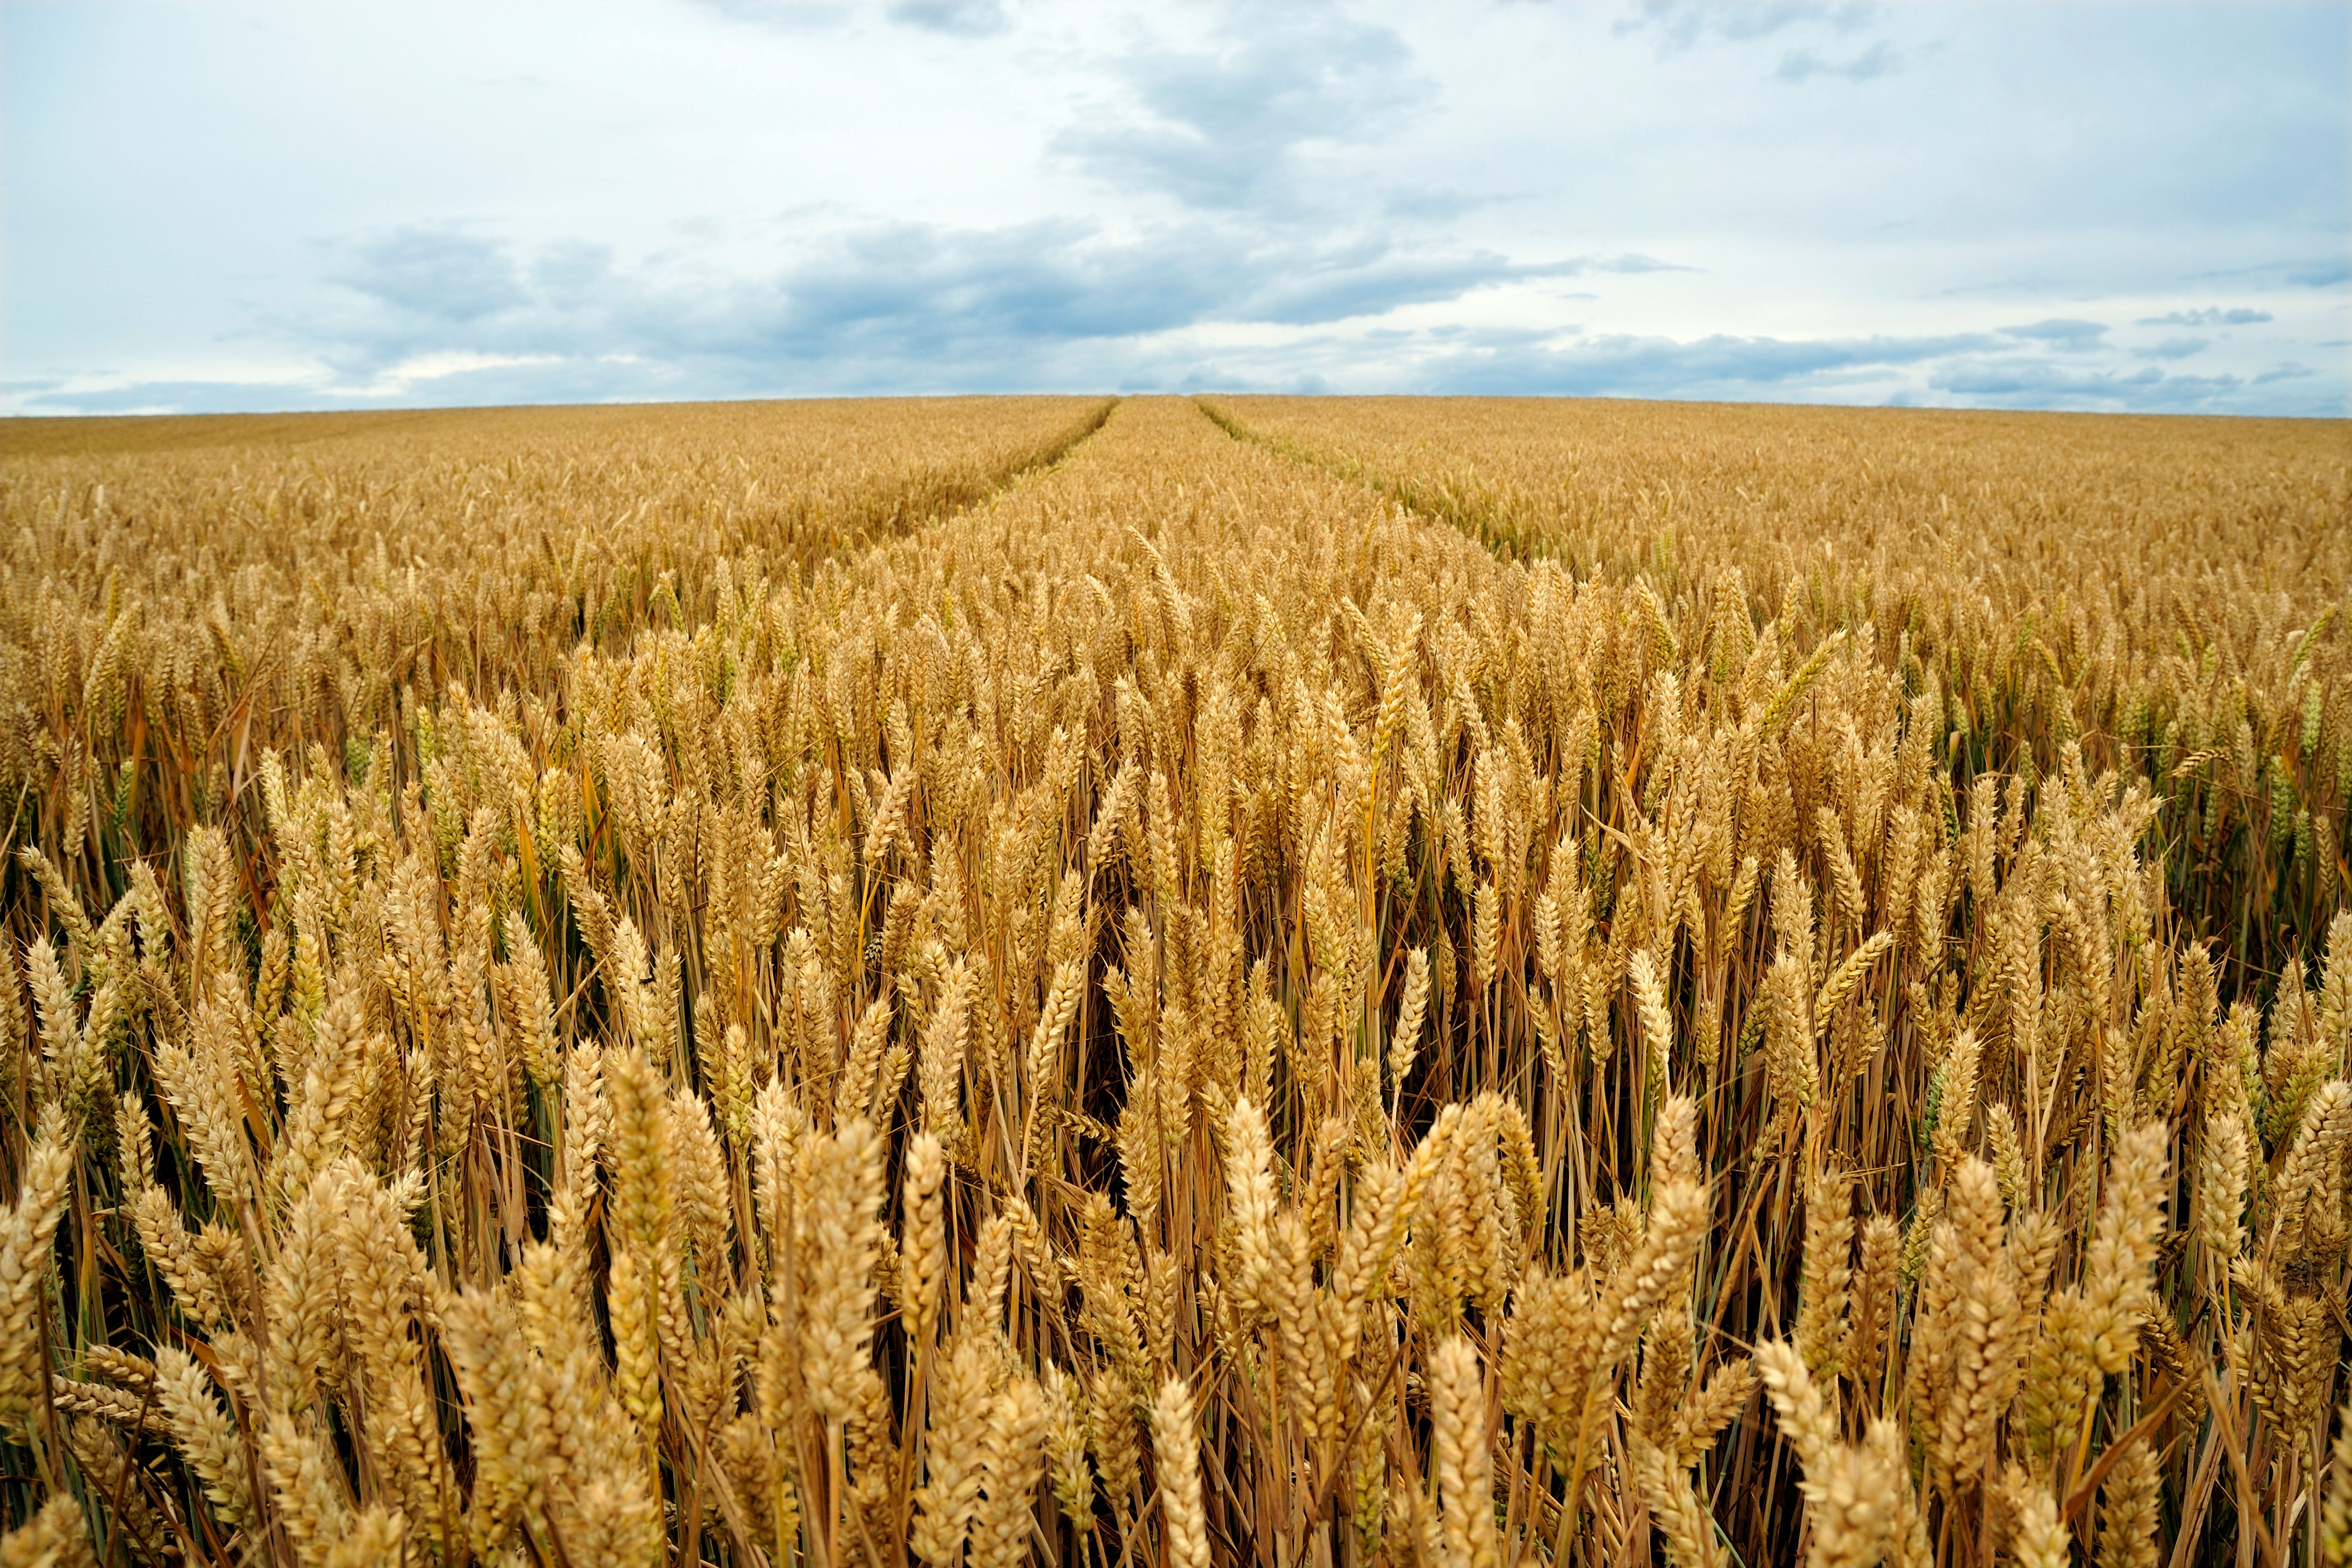 Wheat accounts for 20% of calories consumed by humans